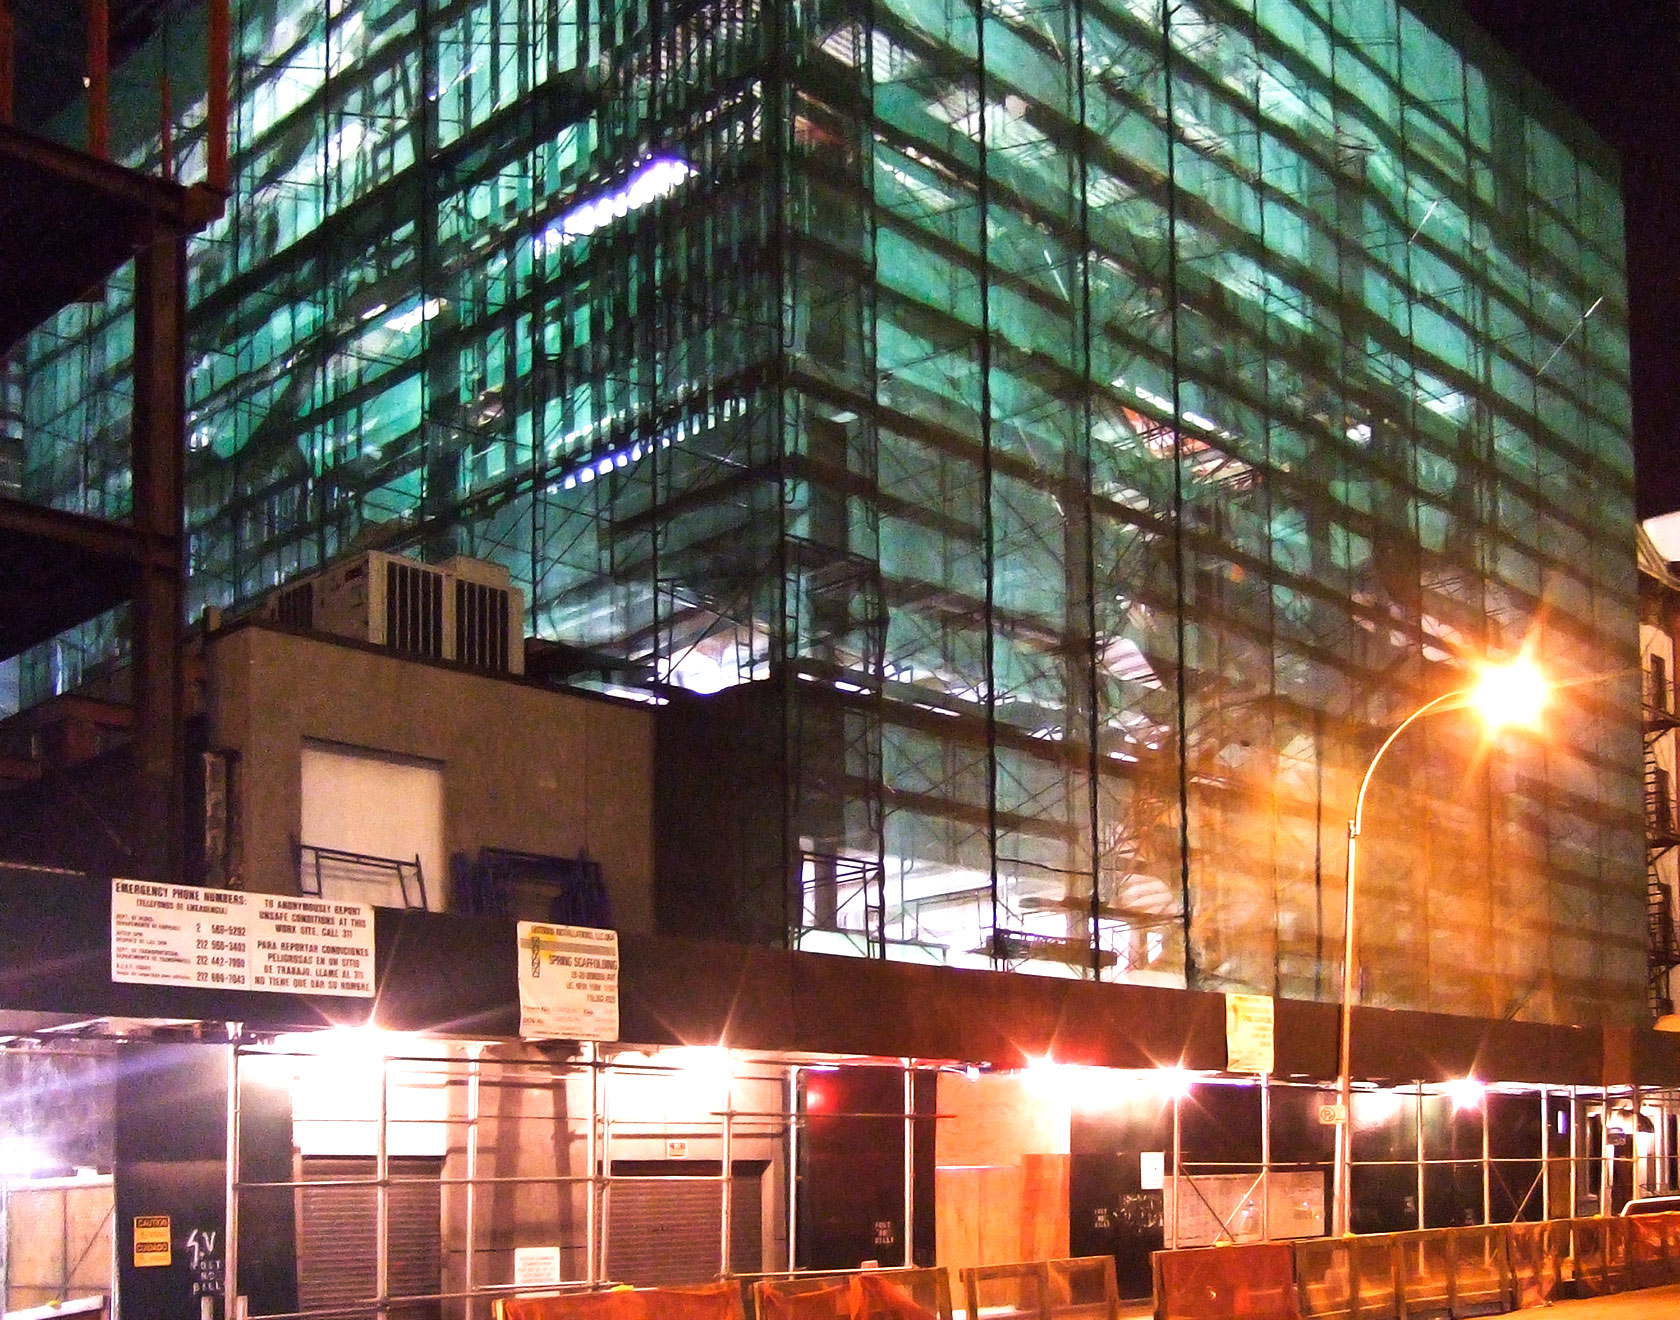 an urban night scene with a large building